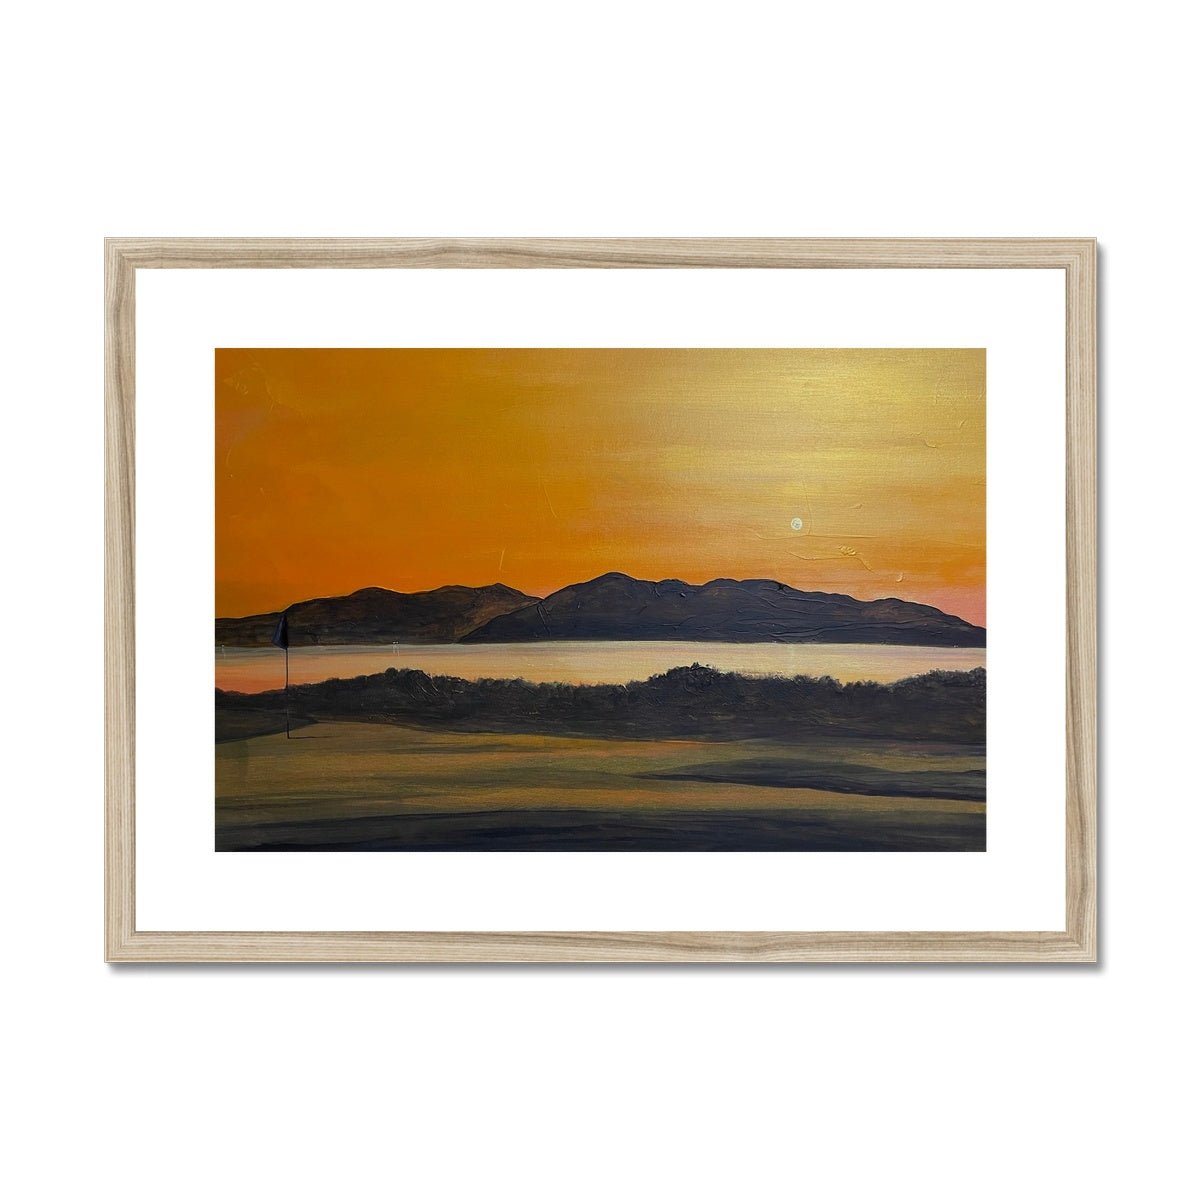 Arran & The 5th Green Royal Troon Golf Course Painting | Framed & Mounted Prints From Scotland-Framed & Mounted Prints-Arran Art Gallery-A2 Landscape-Natural Frame-Paintings, Prints, Homeware, Art Gifts From Scotland By Scottish Artist Kevin Hunter